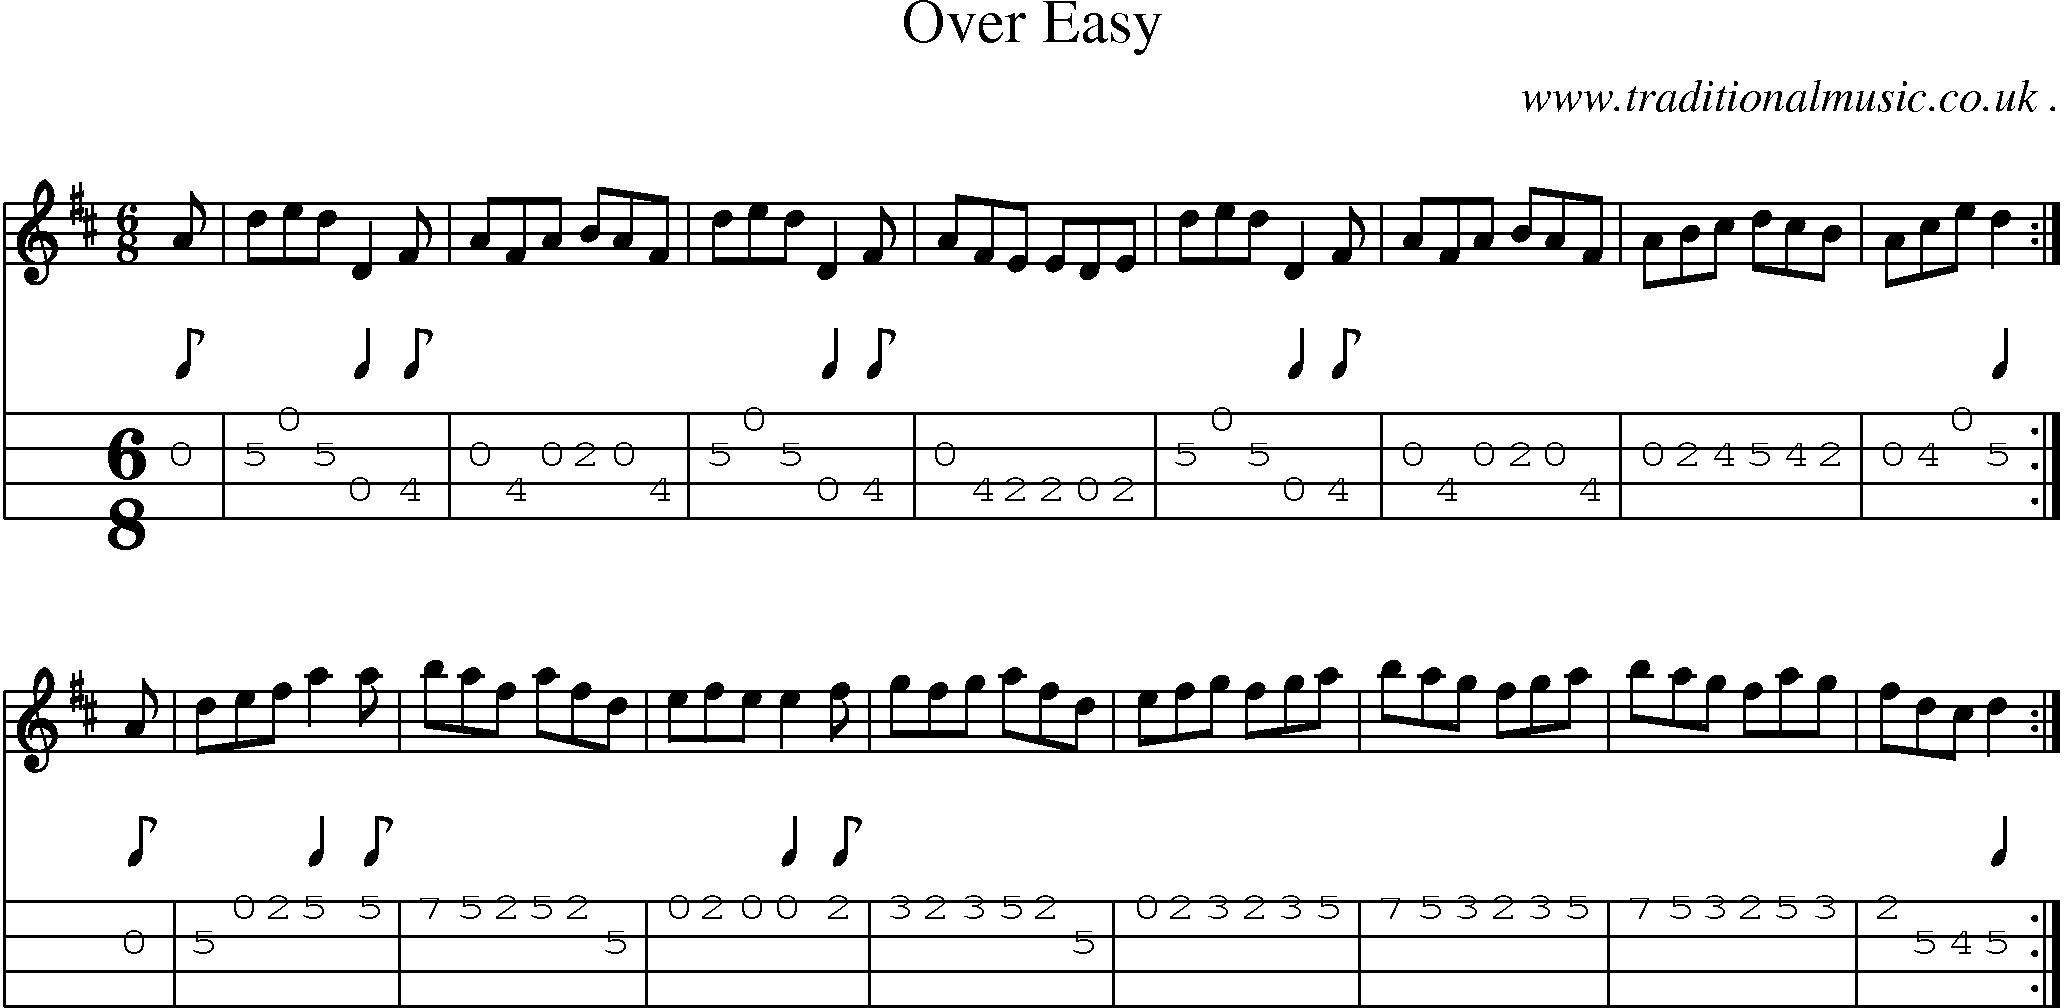 Sheet-music  score, Chords and Mandolin Tabs for Over Easy